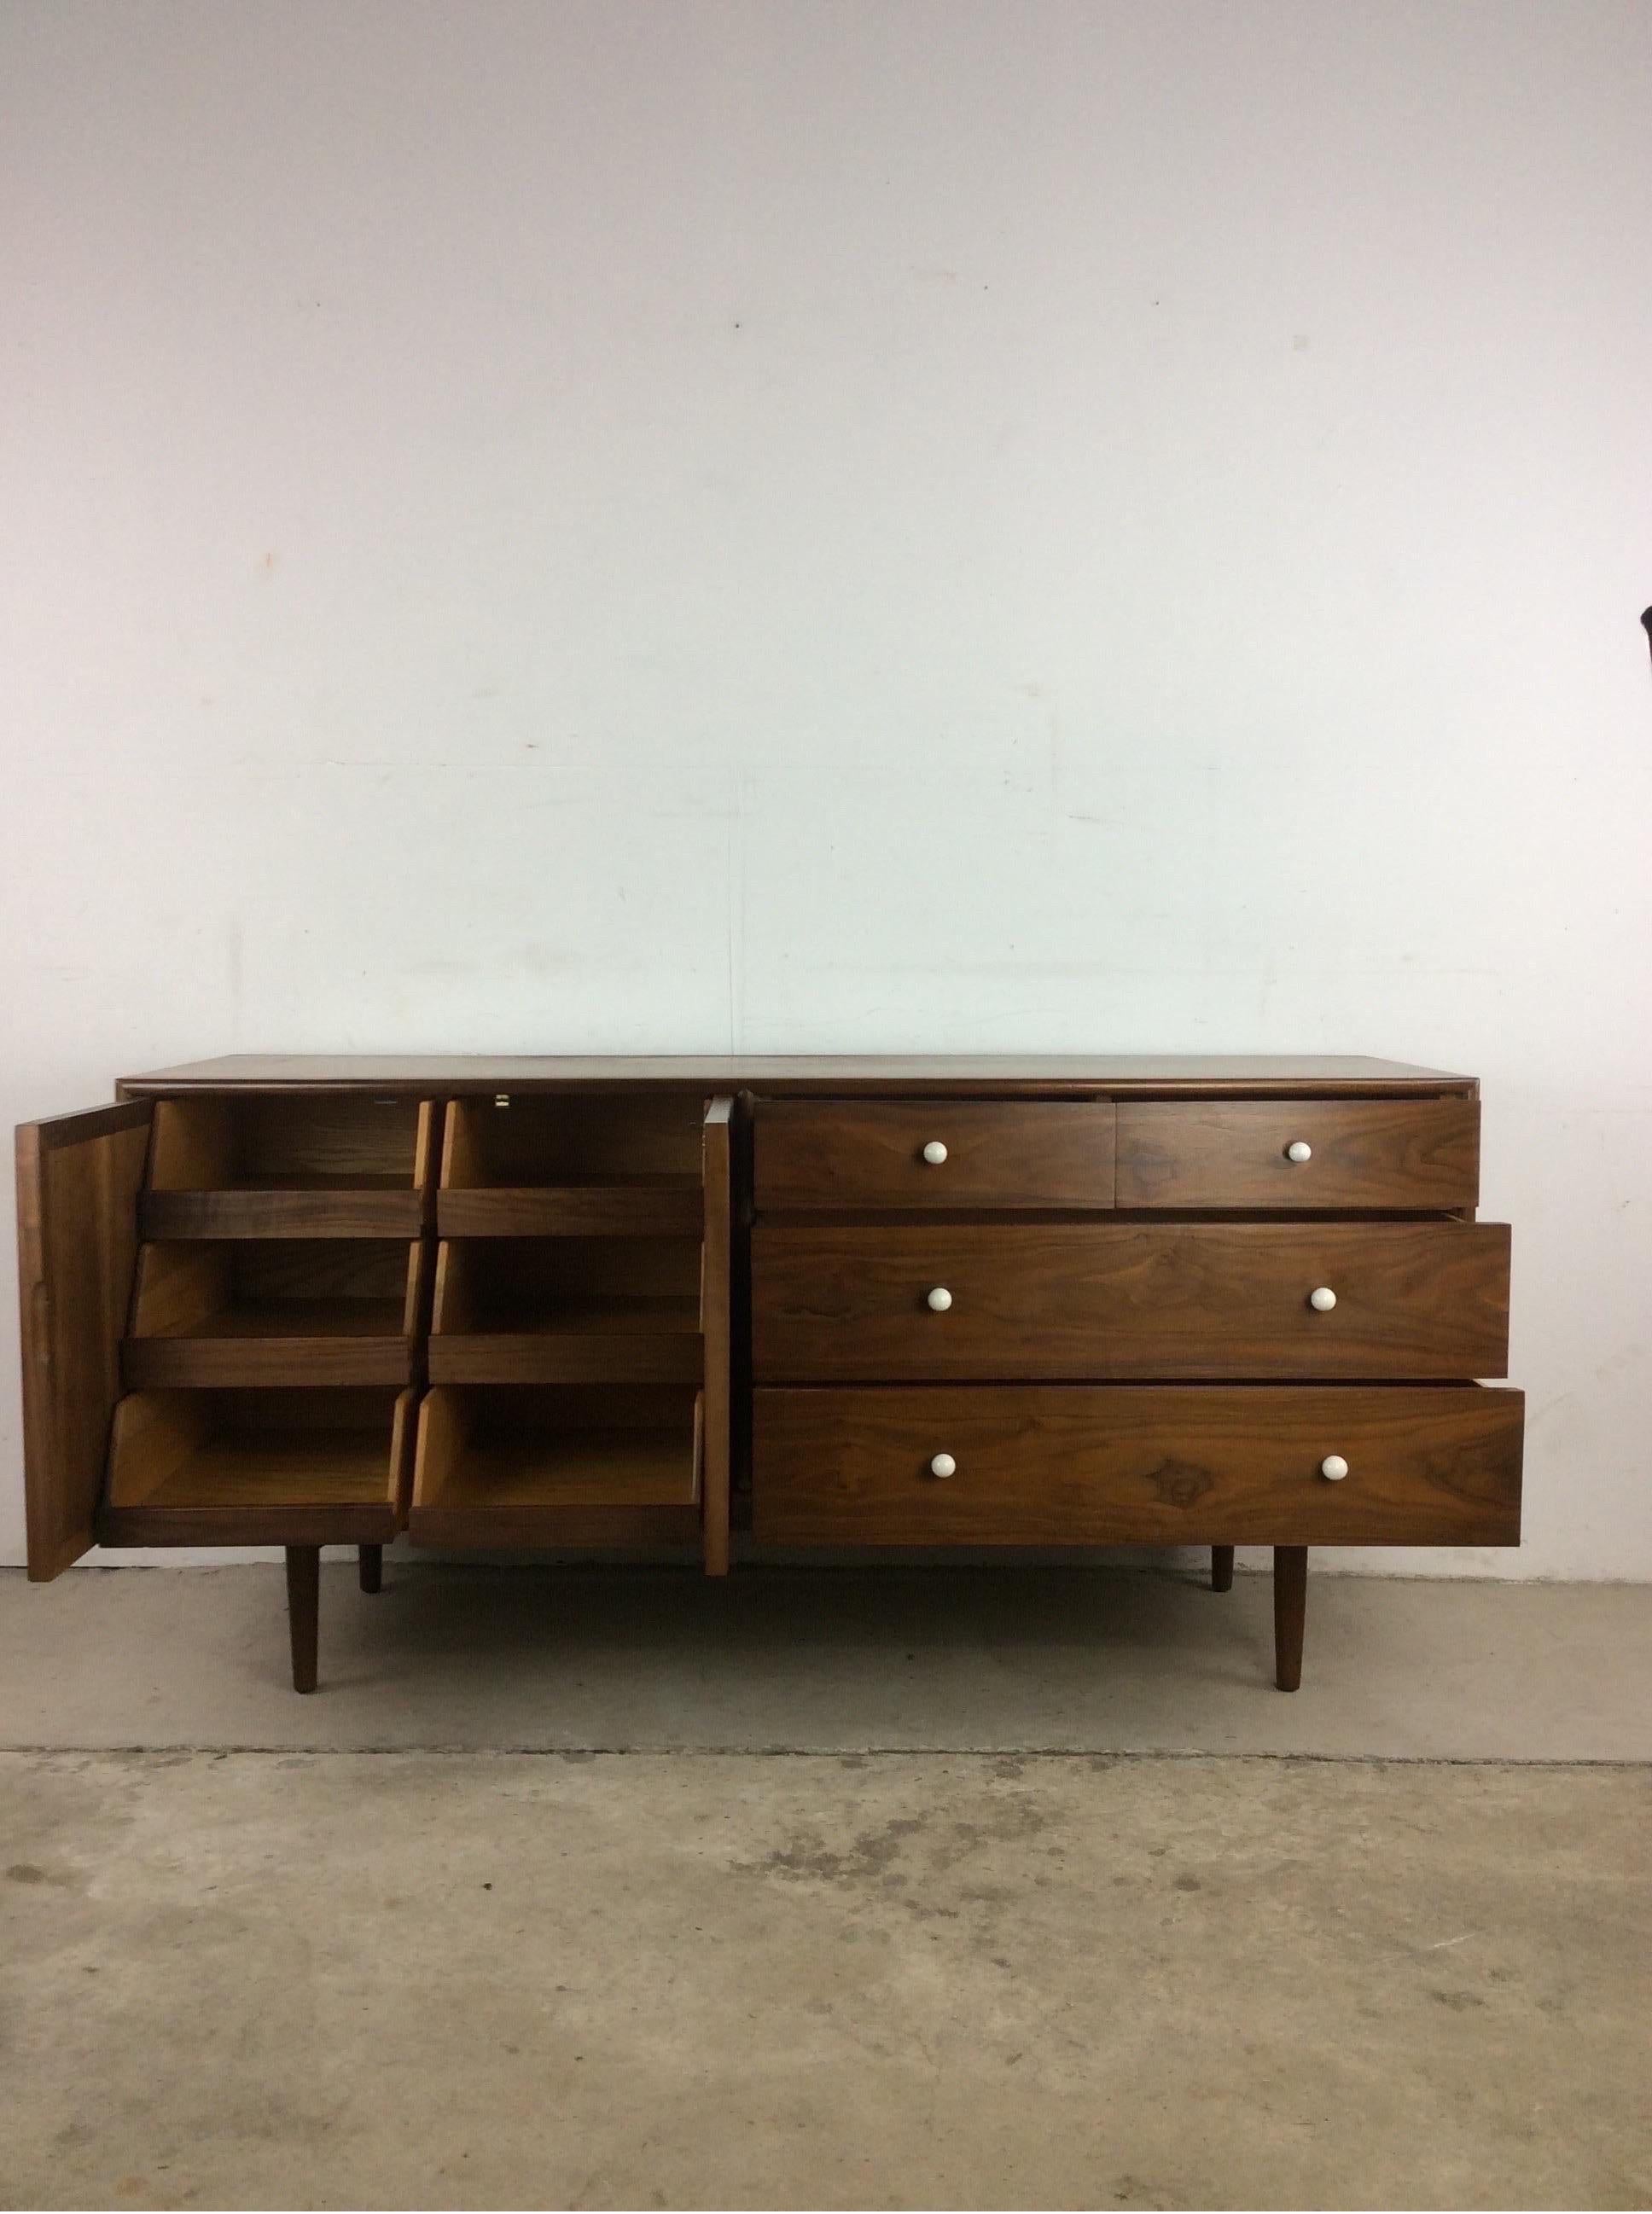 This Mid-Century Modern lowboy dresser from the Declaration line by Drexel features hardwood construction, walnut veneer with original finish, nine dovetailed drawers, two cabinet doors, signature white porcelain hardware, and tall tapered